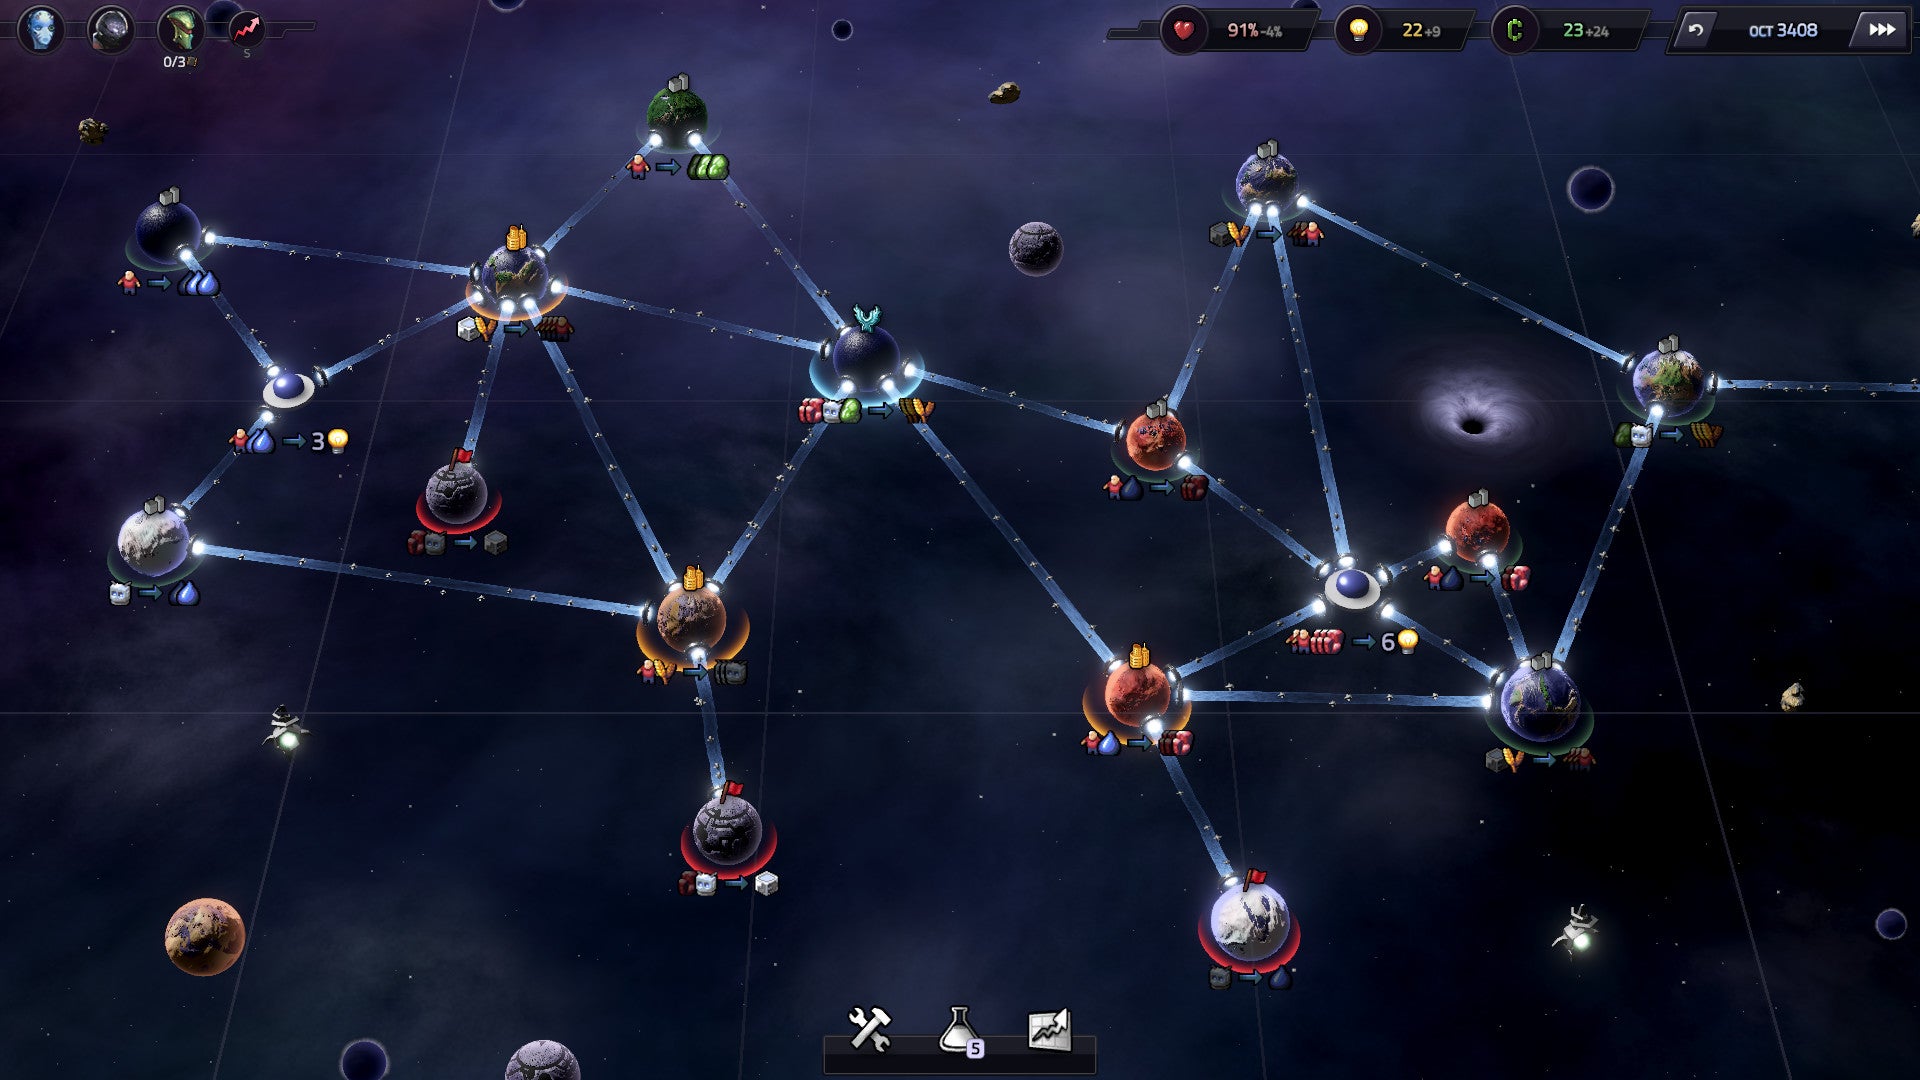 A screenshot of Slipways, showing a group of small planets in space with paths - slipways - connecting them.